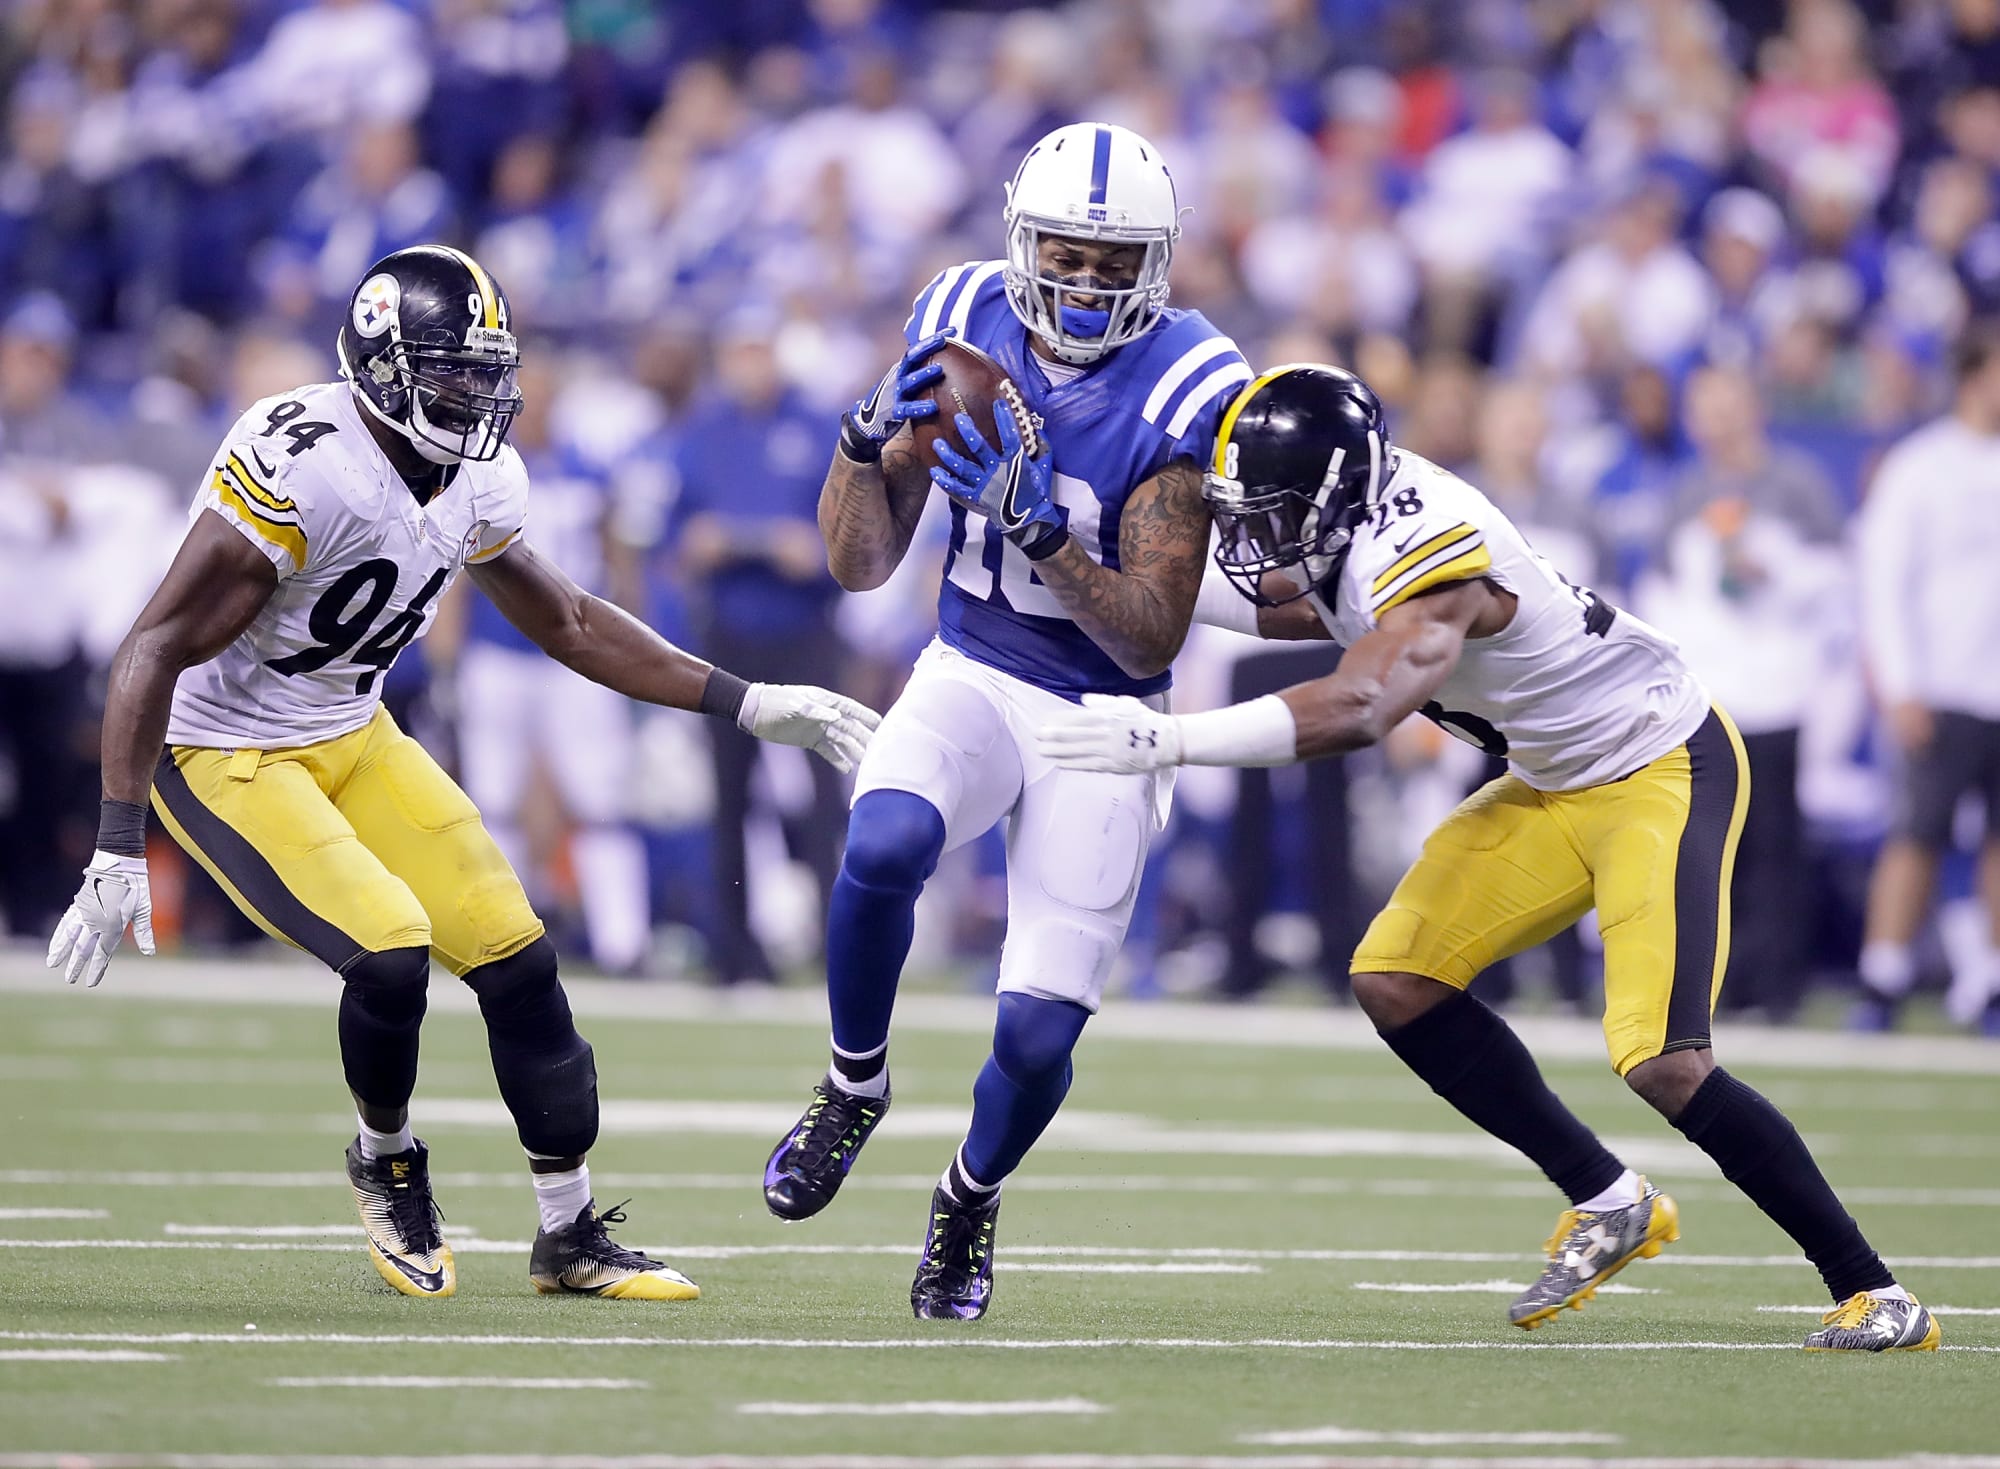 Colts vs Steelers Preview TV Schedule, Live Stream, Radio